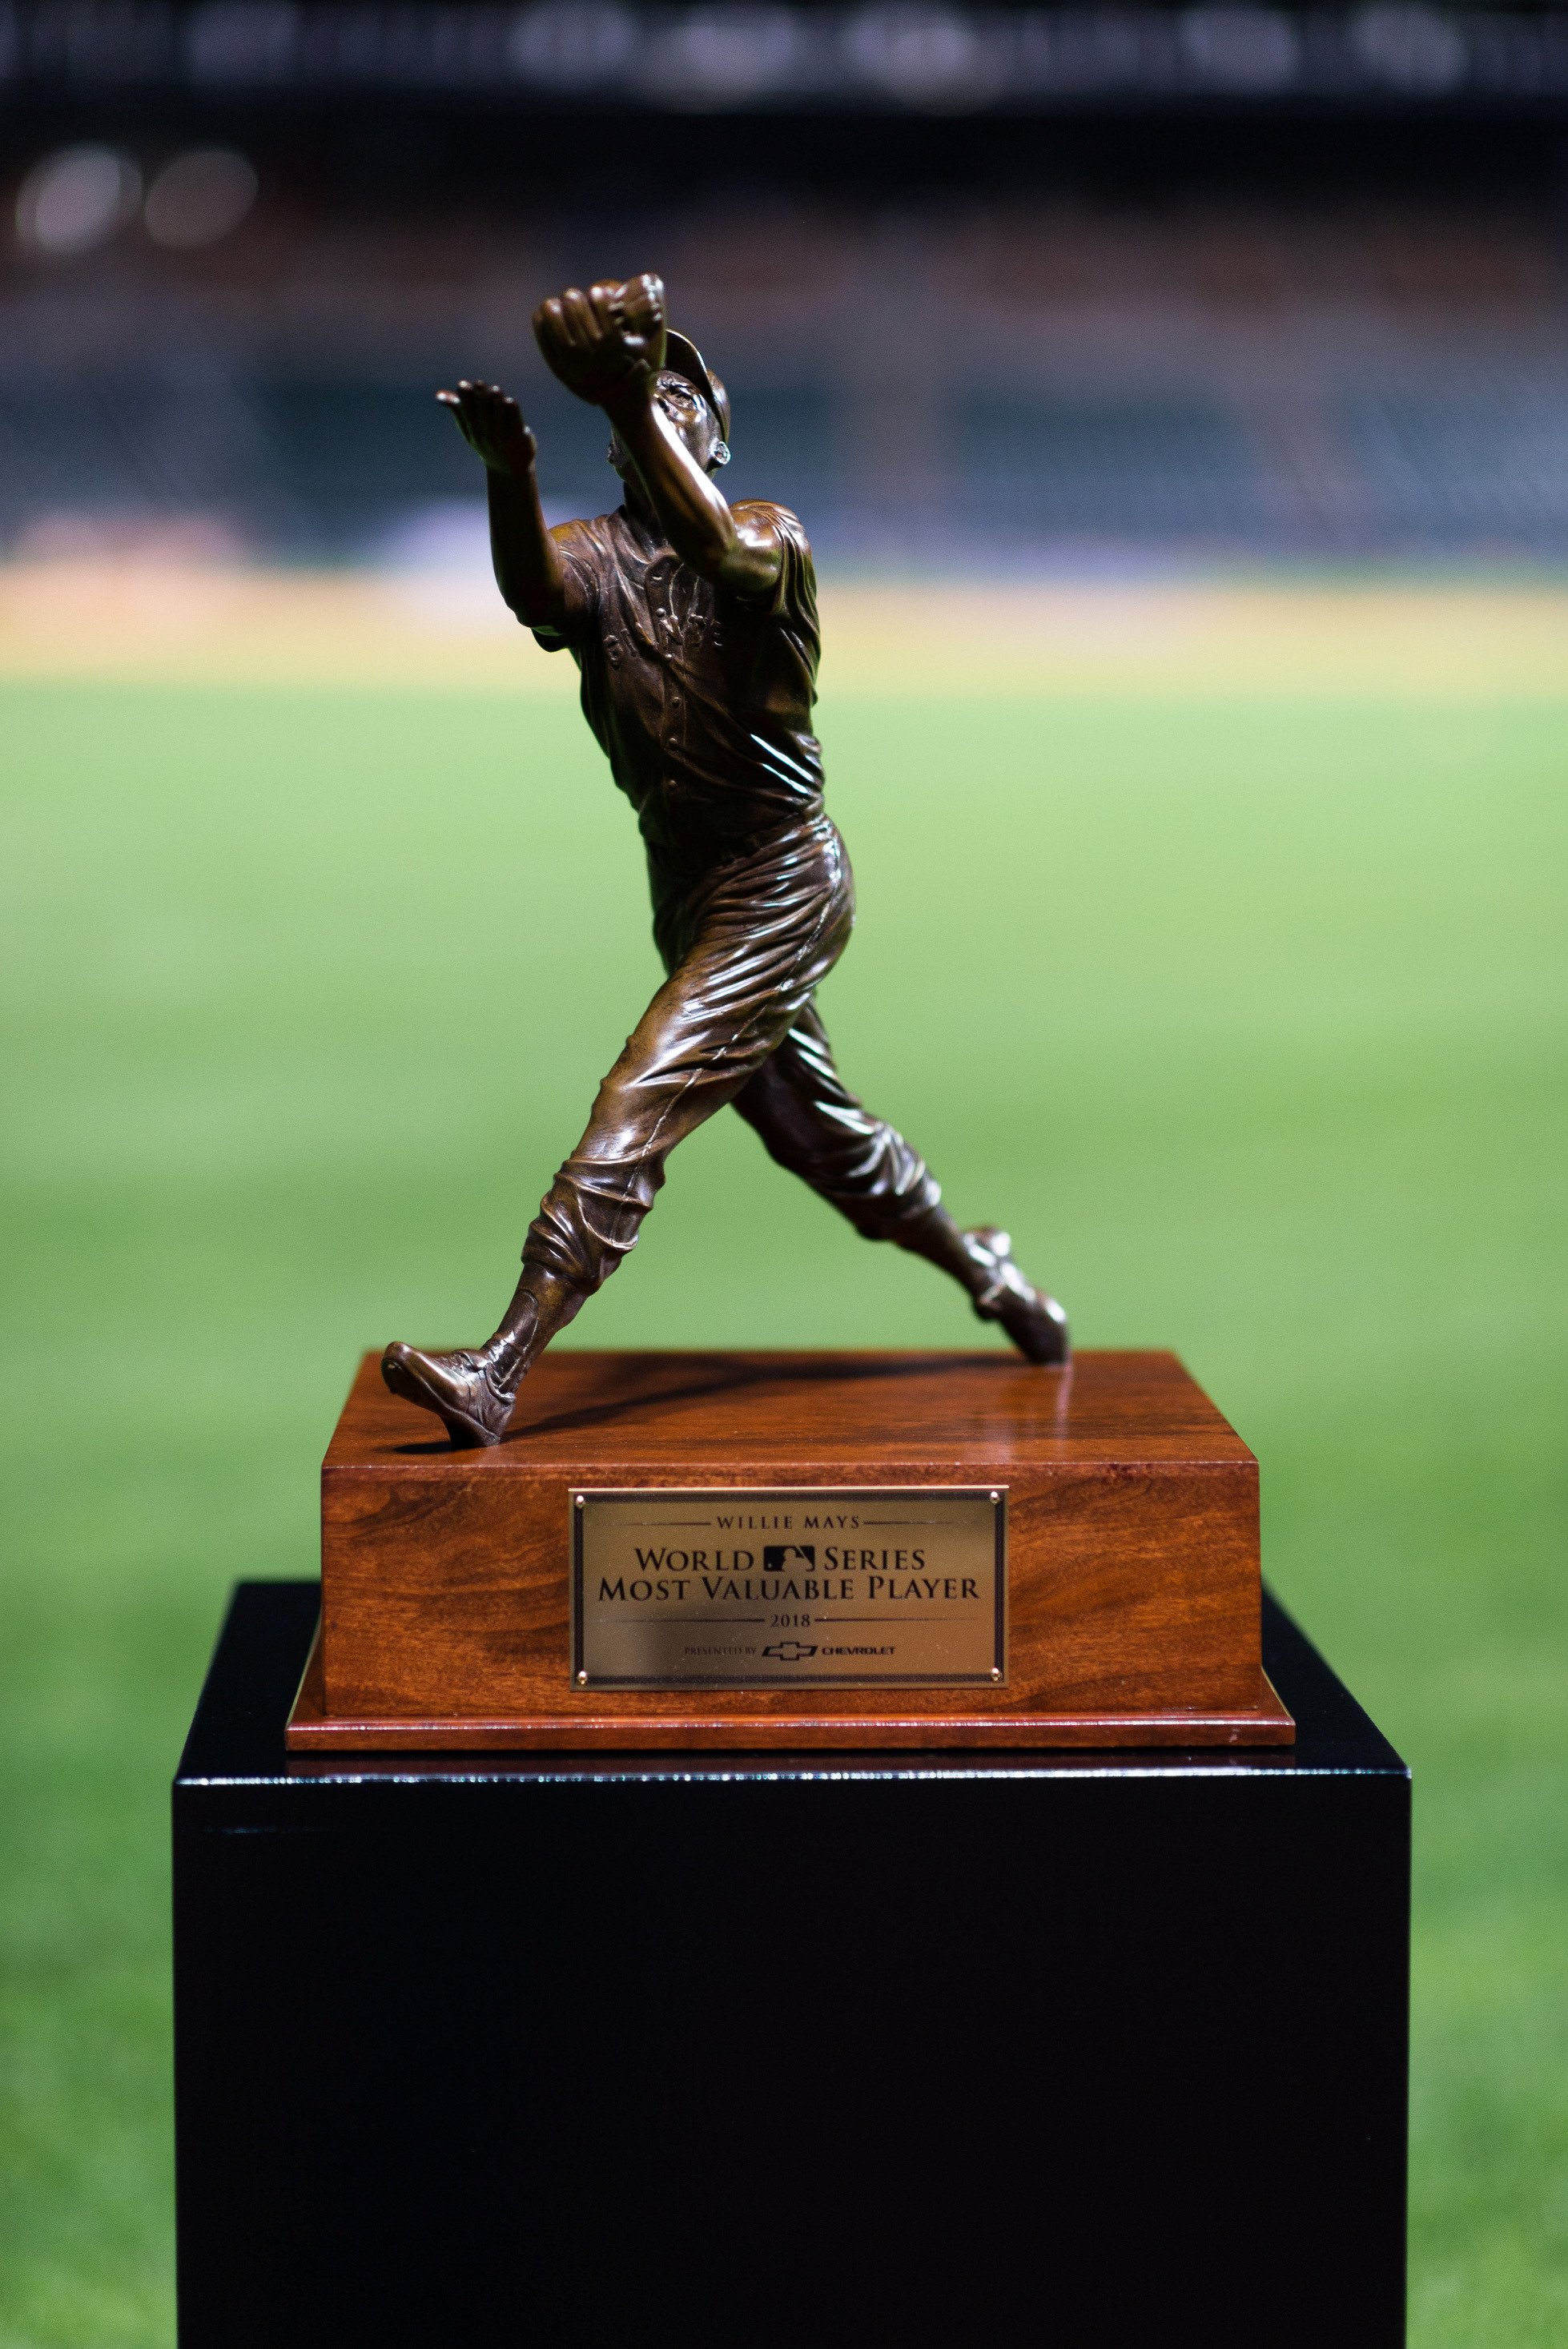 MLB on X: The new Willie Mays #WorldSeries MVP trophy in all its